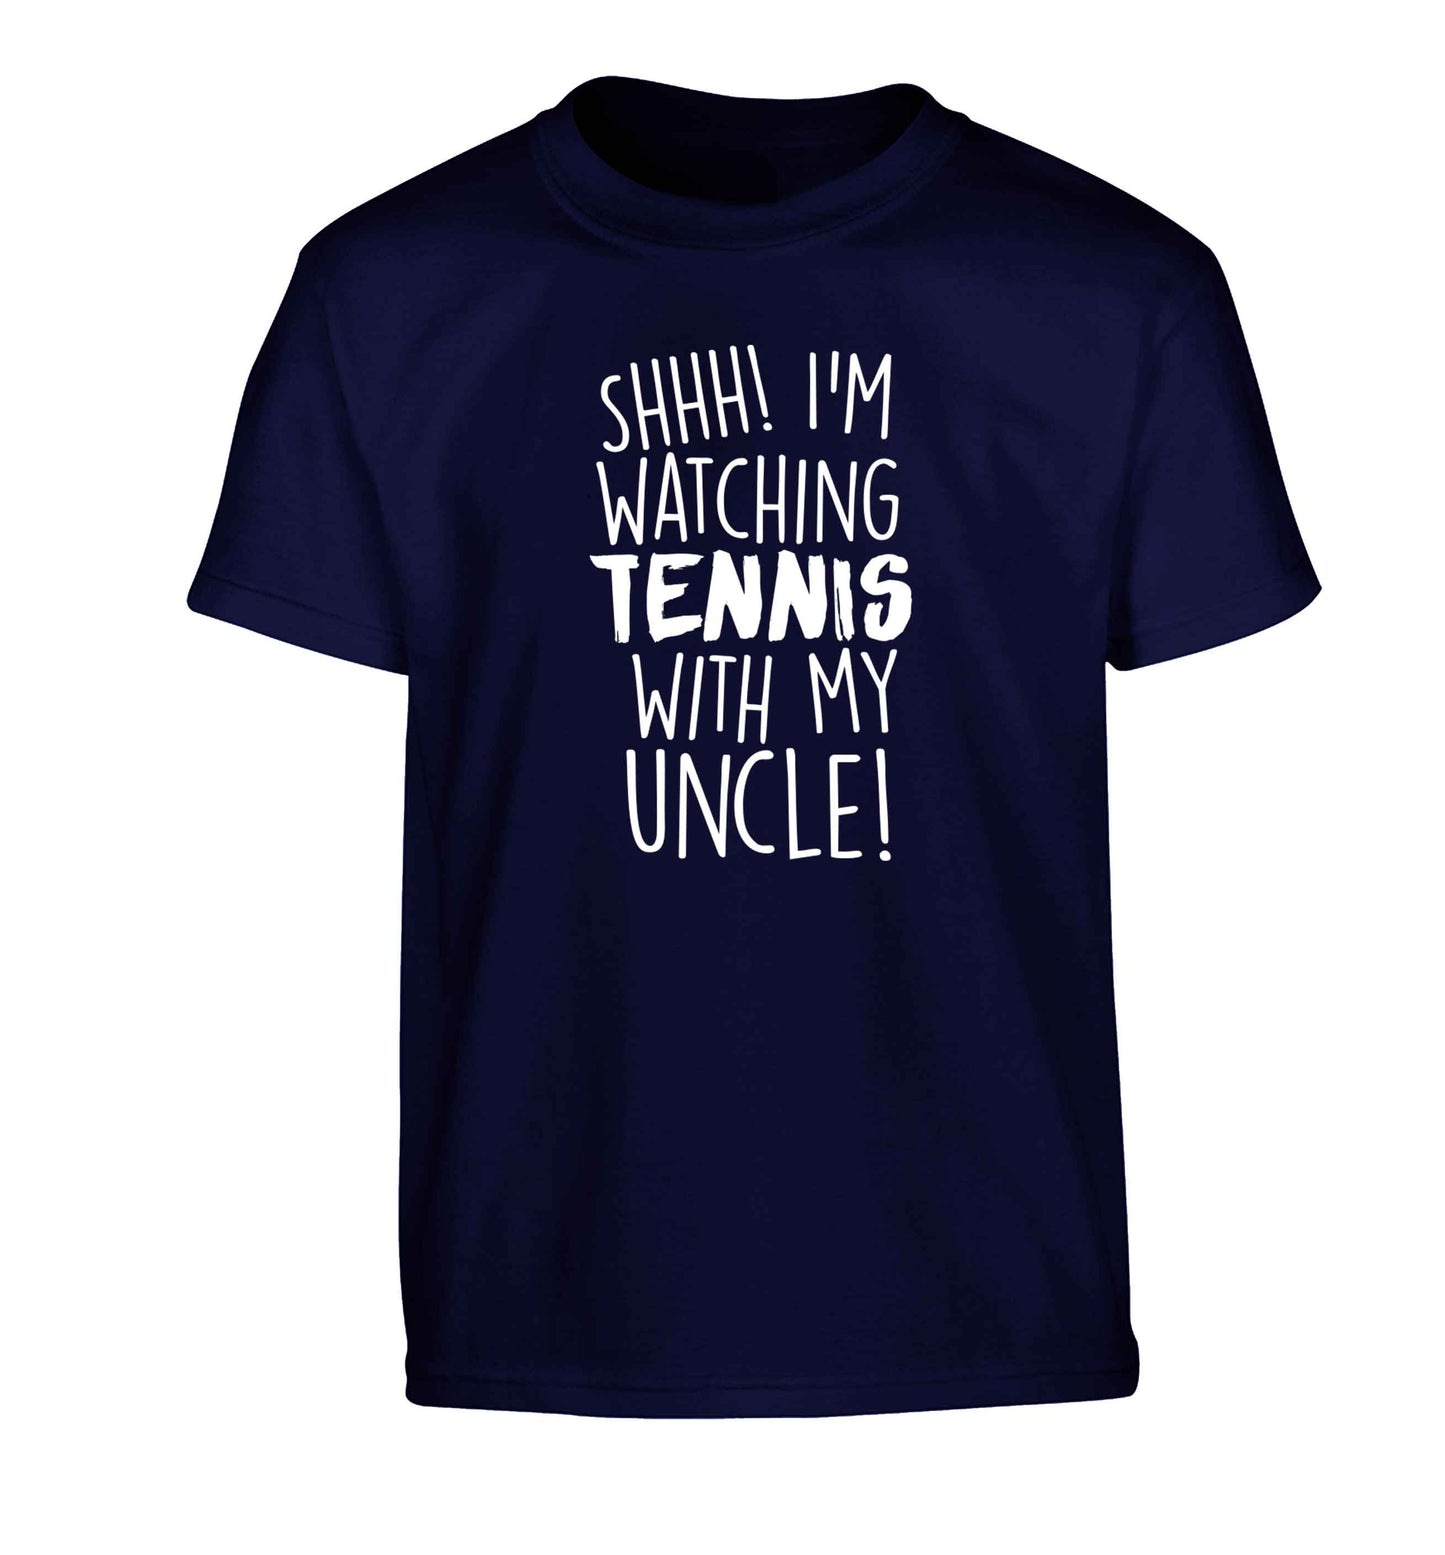 Shh! I'm watching tennis with my uncle! Children's navy Tshirt 12-13 Years